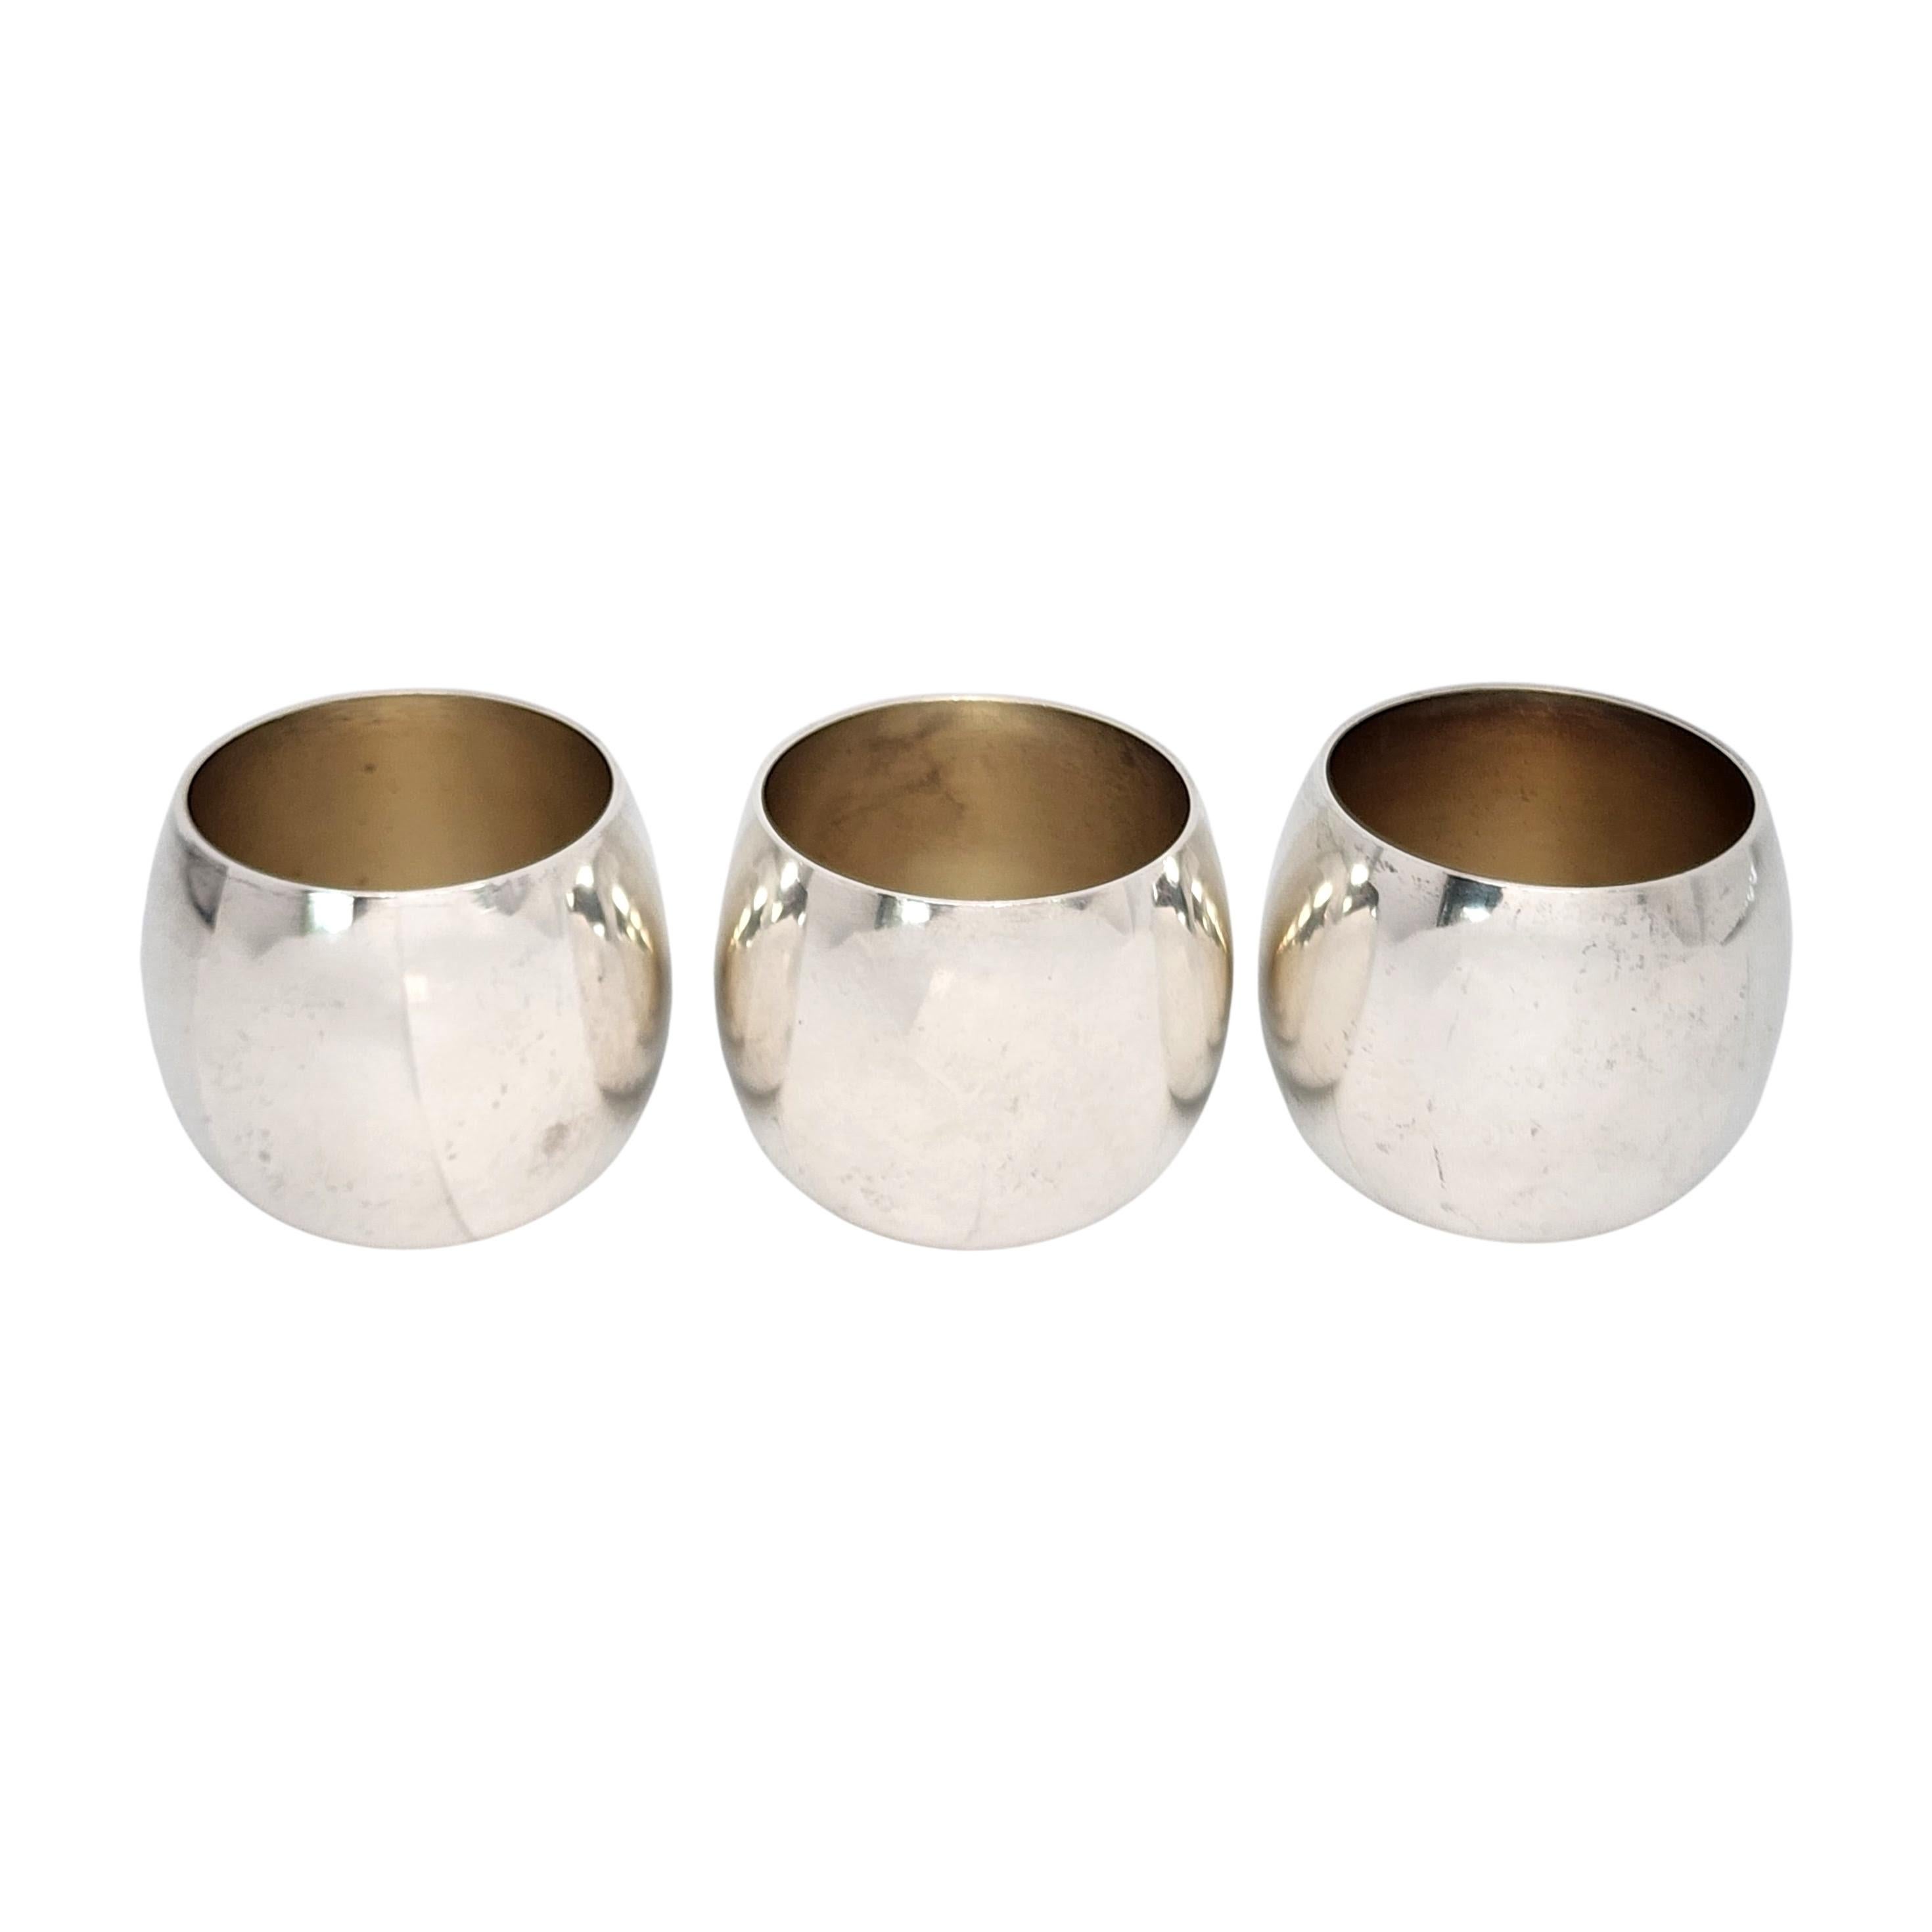 Set of 3 Tiffany & Co Makers sterling silver shot/cordial cups.

No monogram or engraving.

Round design with a smooth polished finish and a light gold wash interior. Does not include Tiffany & Co box or pouch.

Measures approx 1 3/8